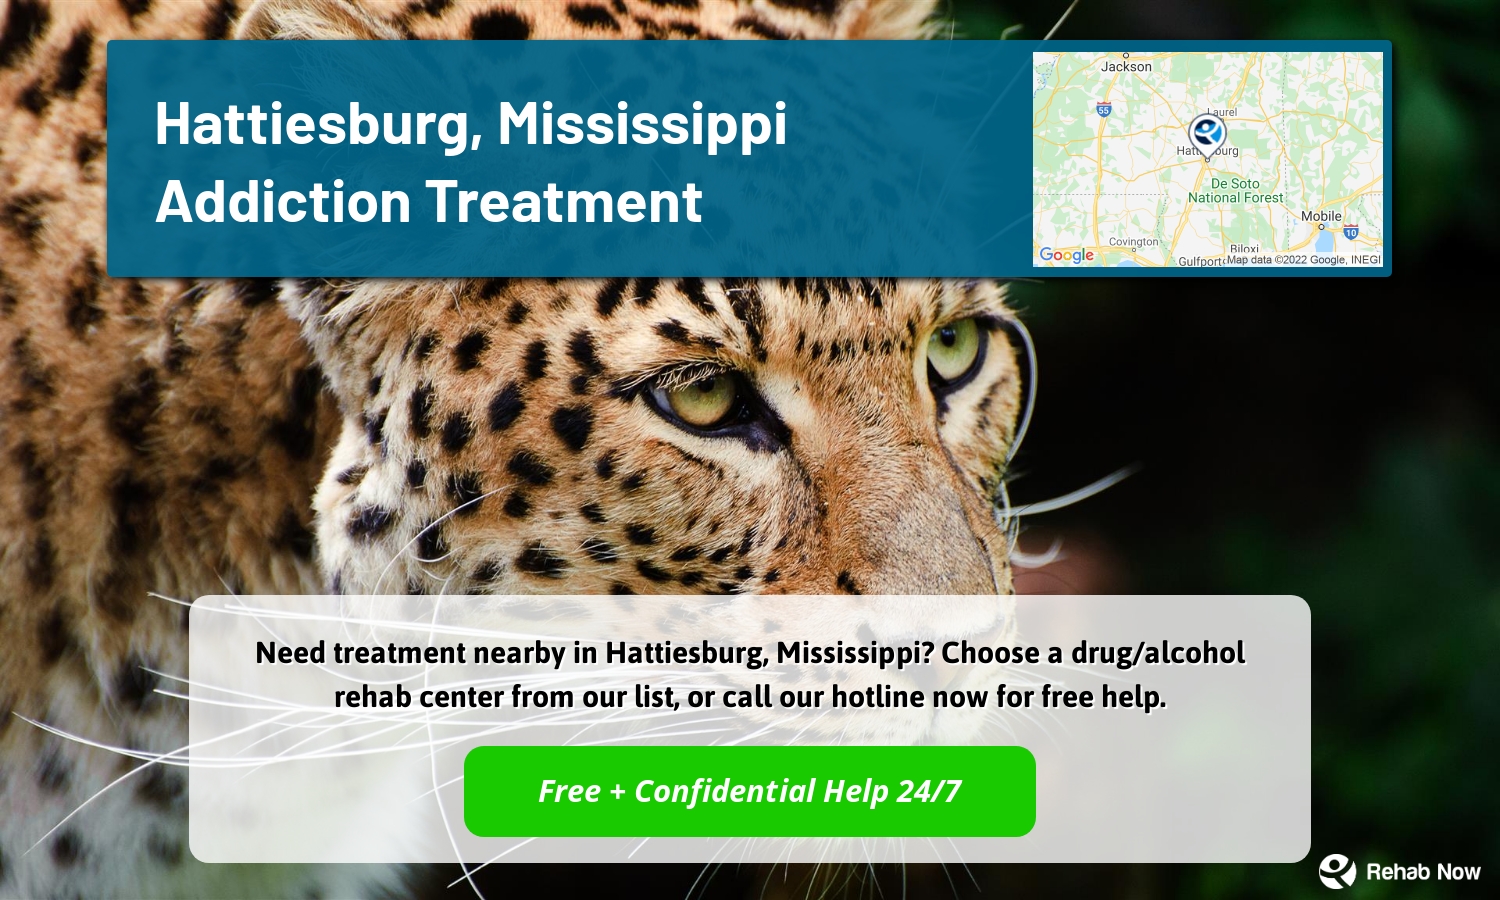 Need treatment nearby in Hattiesburg, Mississippi? Choose a drug/alcohol rehab center from our list, or call our hotline now for free help.